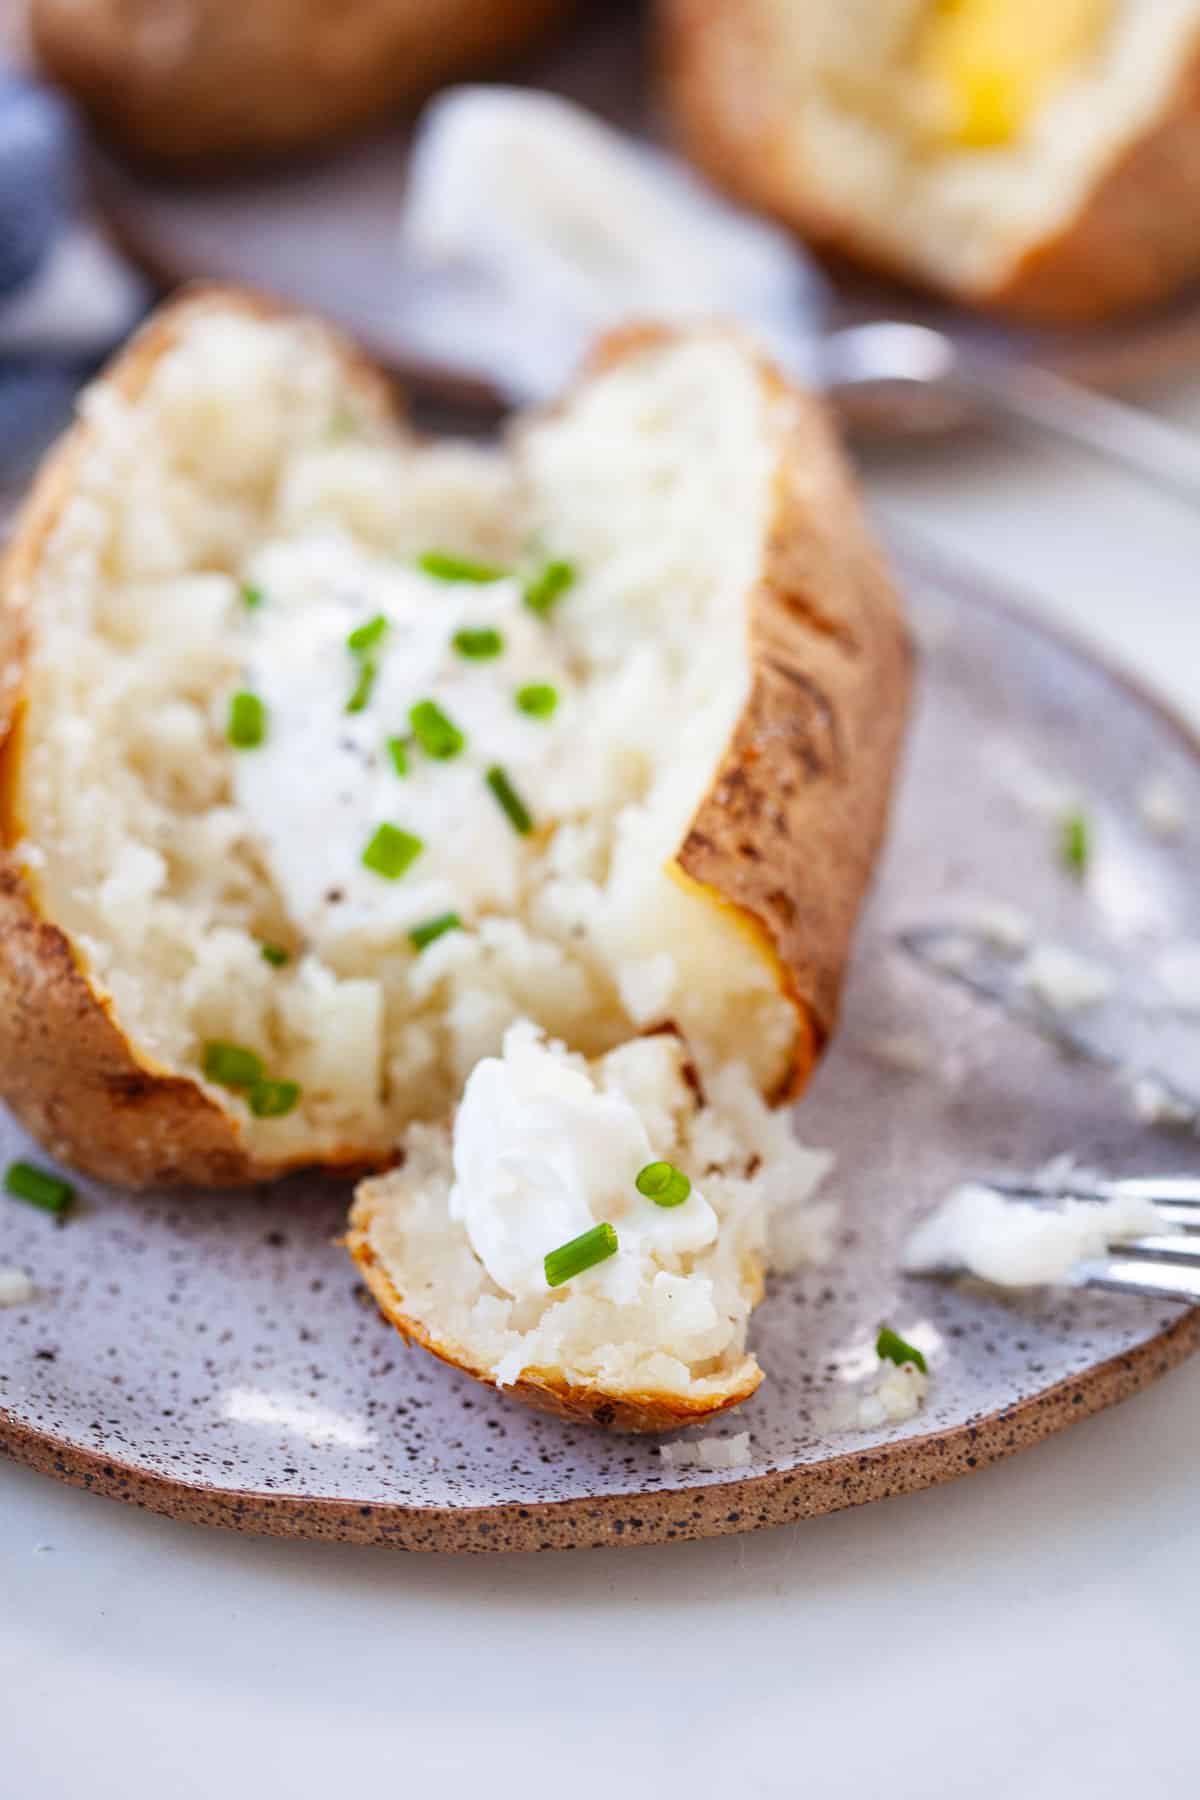 baked potato that's sliced in half with sour cream and sliced scallions on top